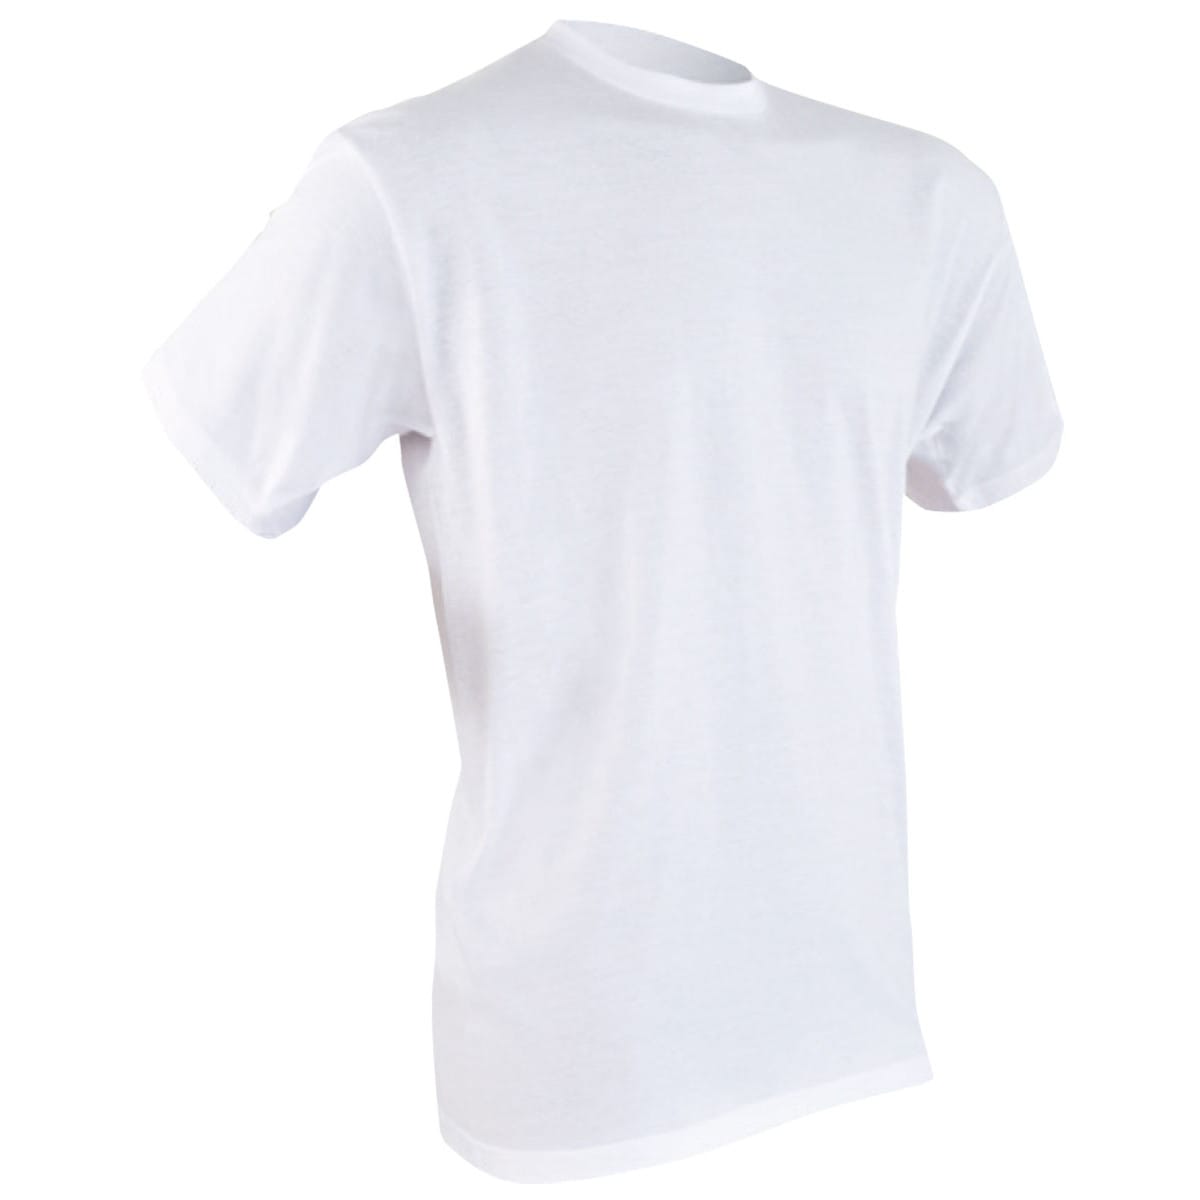 VEPRO - TEE-SHIRT BLANC Taille XL